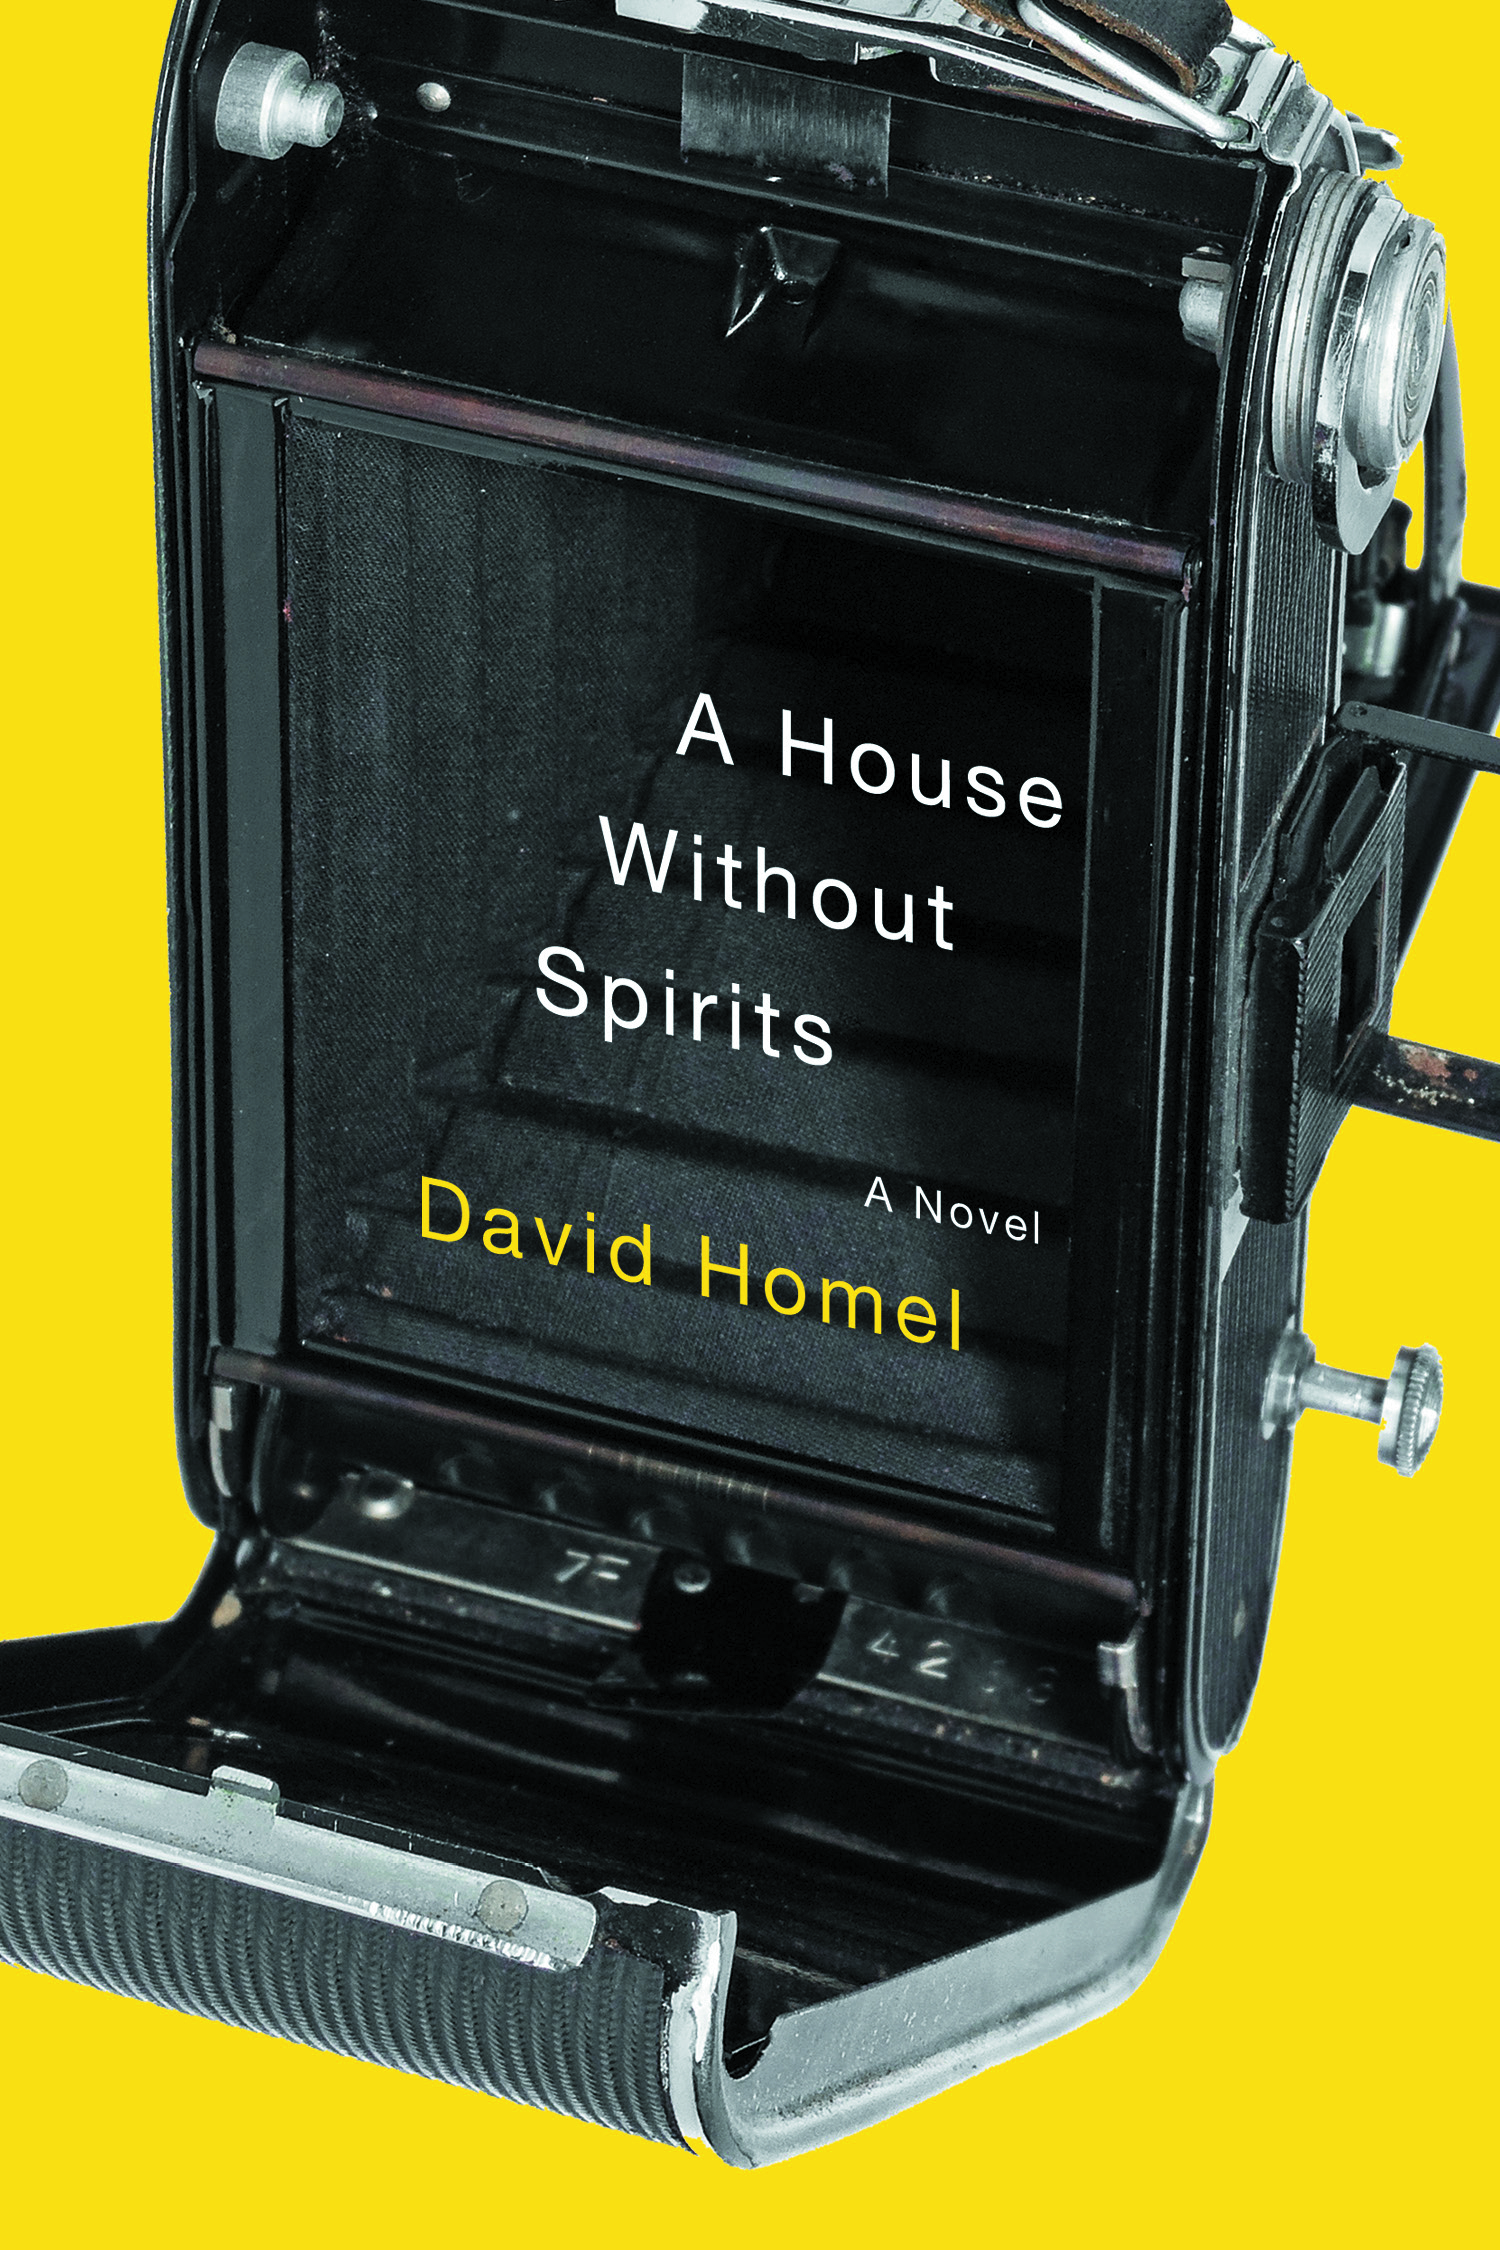 A House Without Spirits